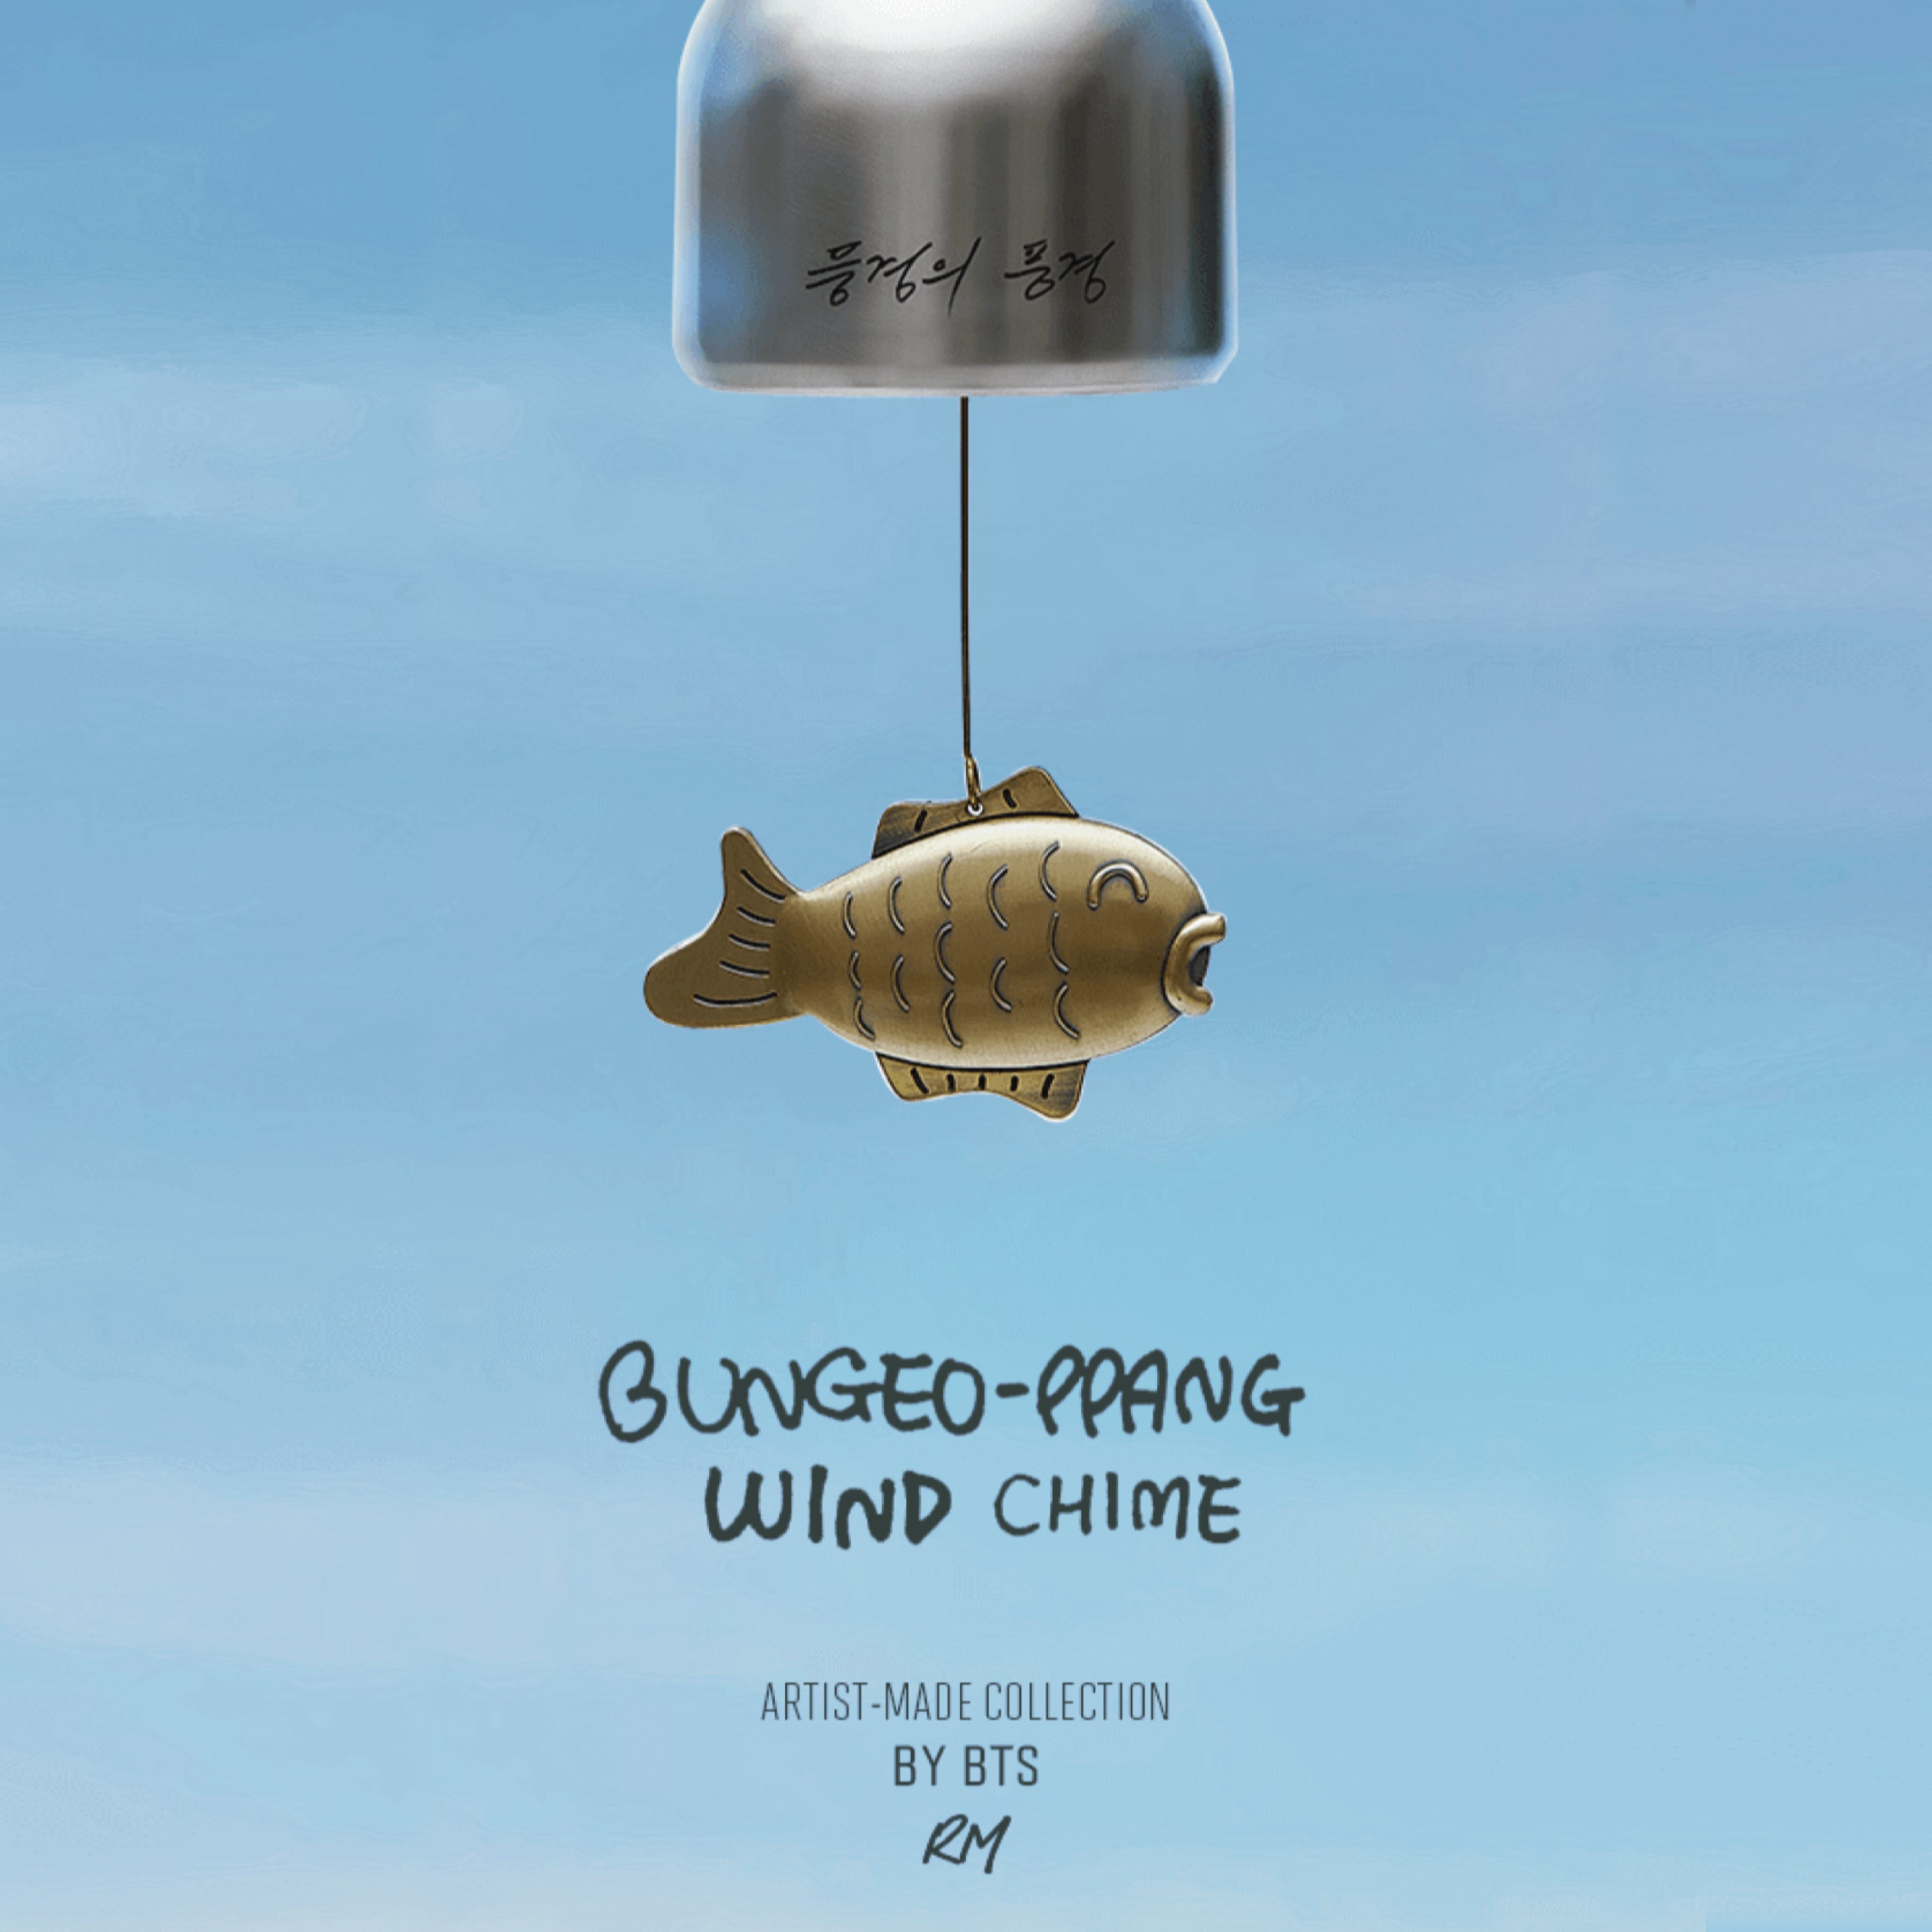 BTS BUNGEO-PPANG WIND CHIME RM ナムジュン 風鈴 www.krzysztofbialy.com